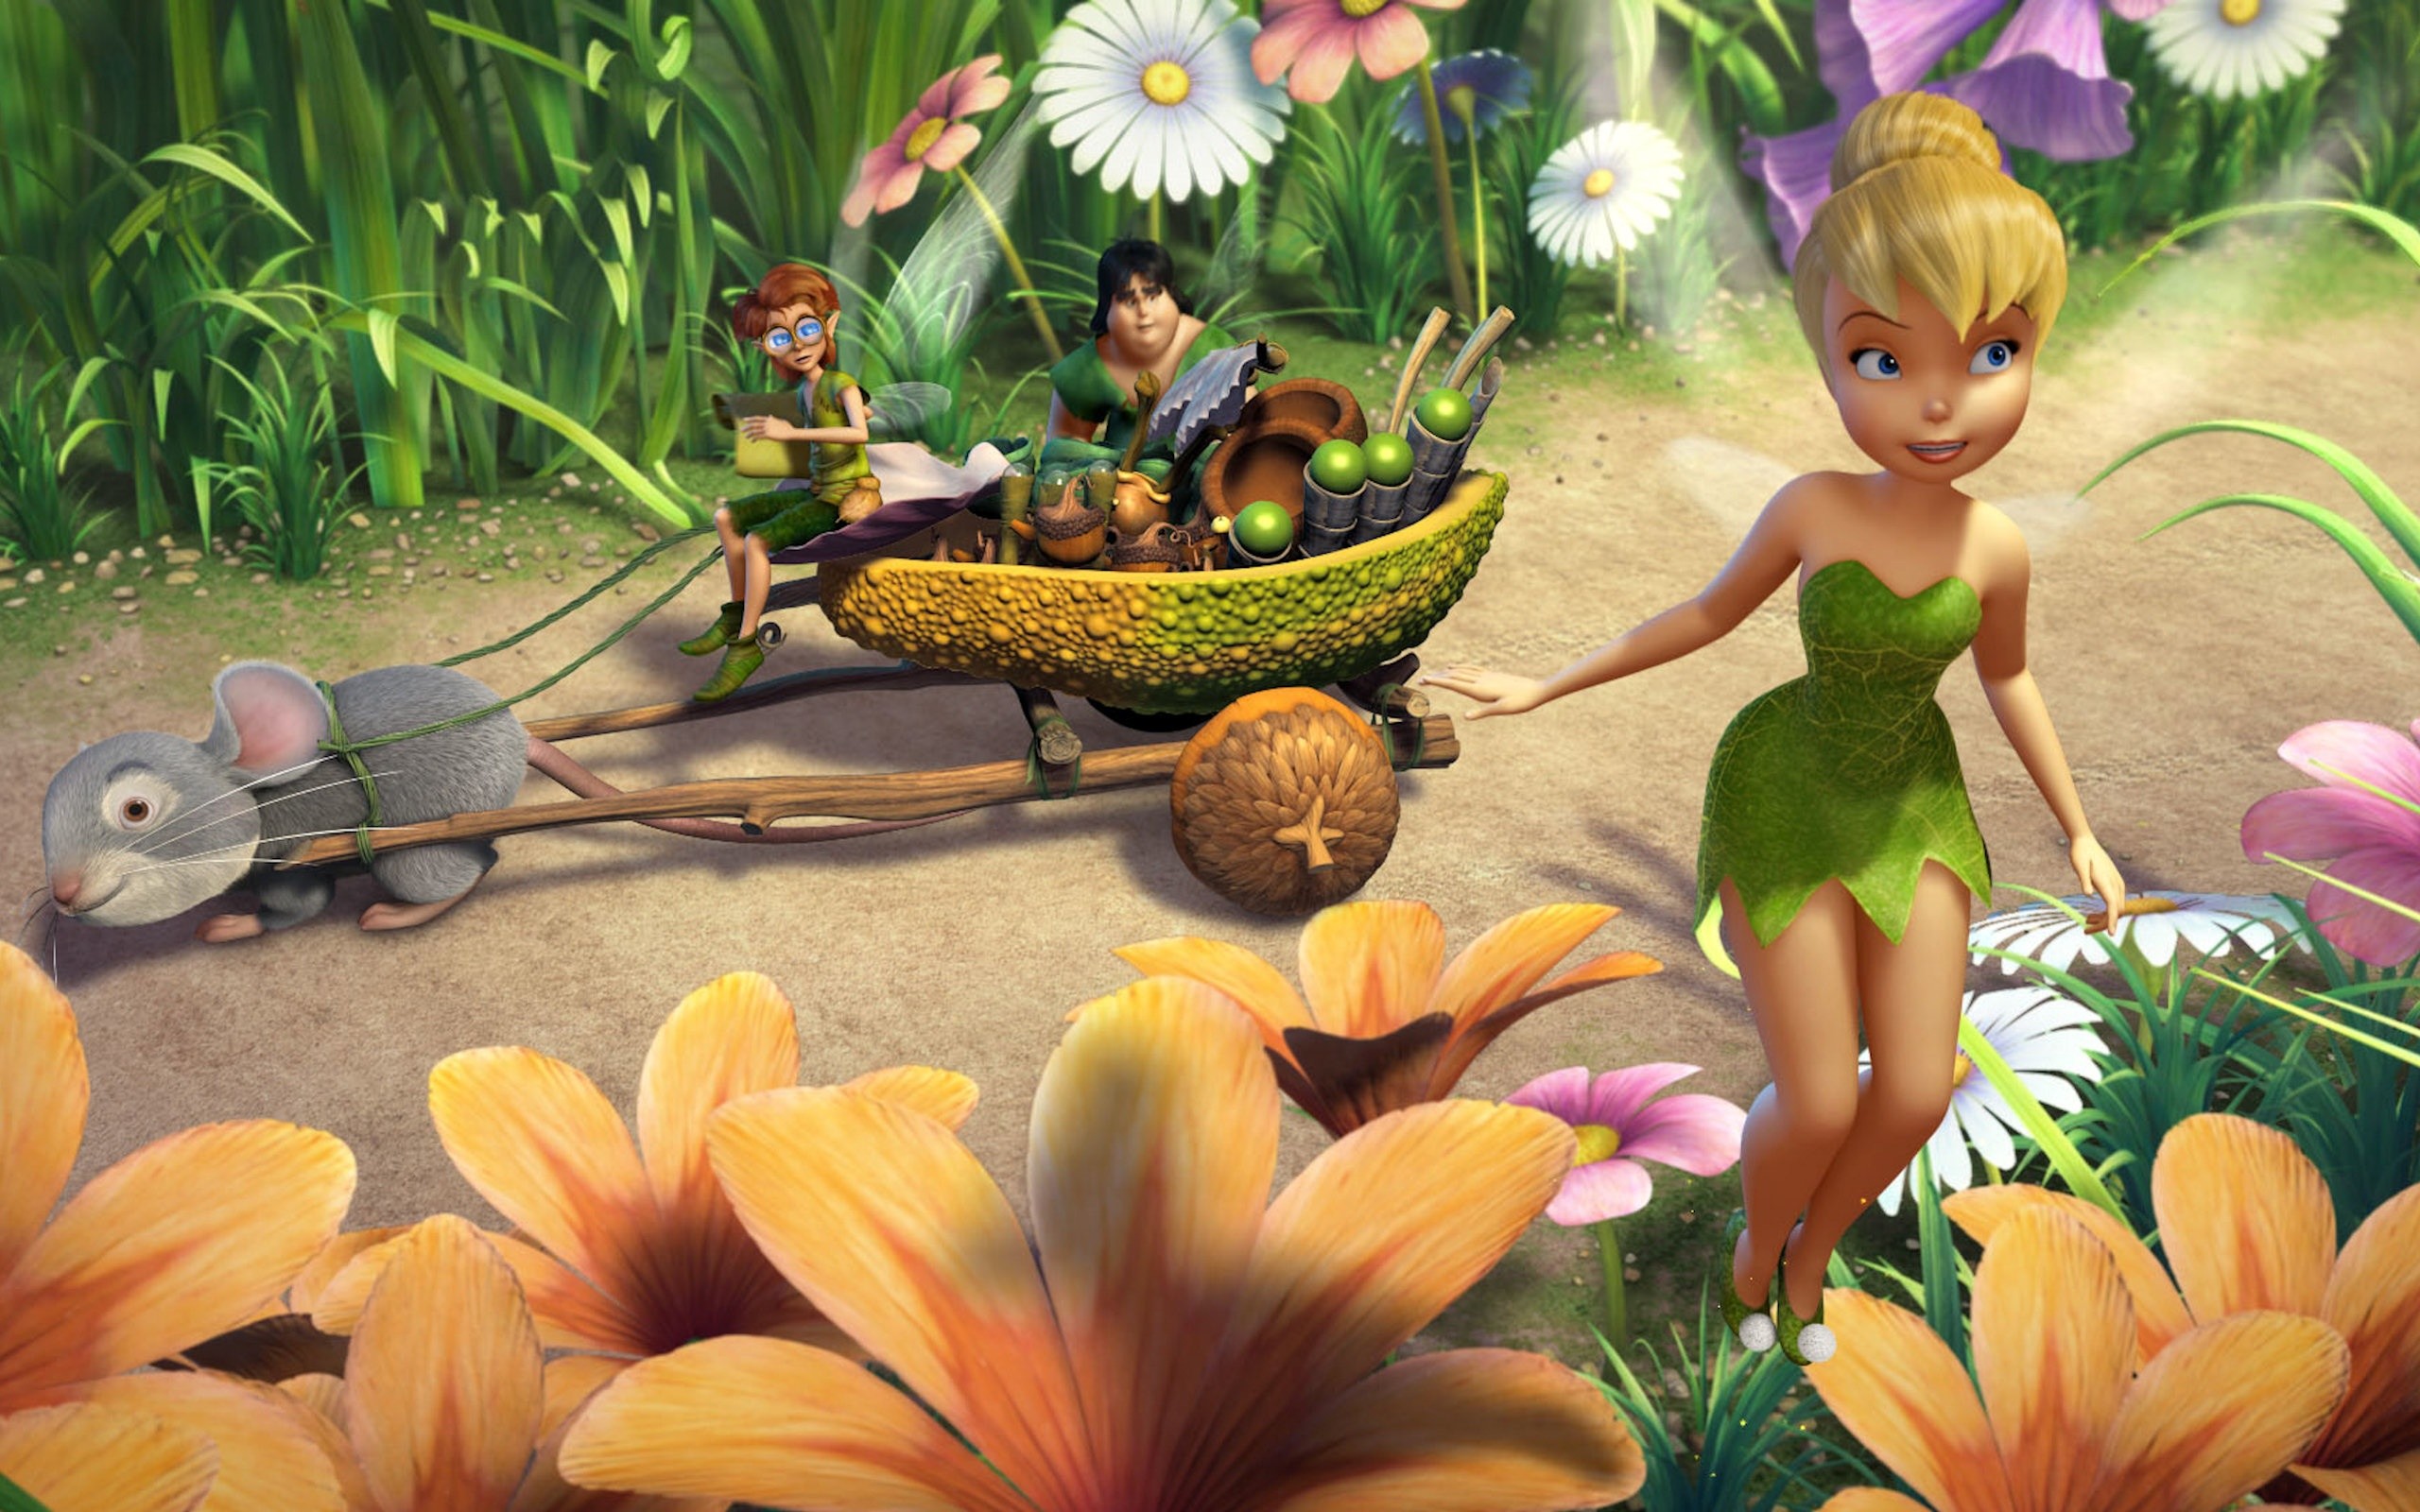 2560x1600 Free Tinkerbell Wallpapers Wallpaper | HD Wallpapers | Pinterest | Tinkerbell  wallpaper, Hd wallpaper and Wallpaper